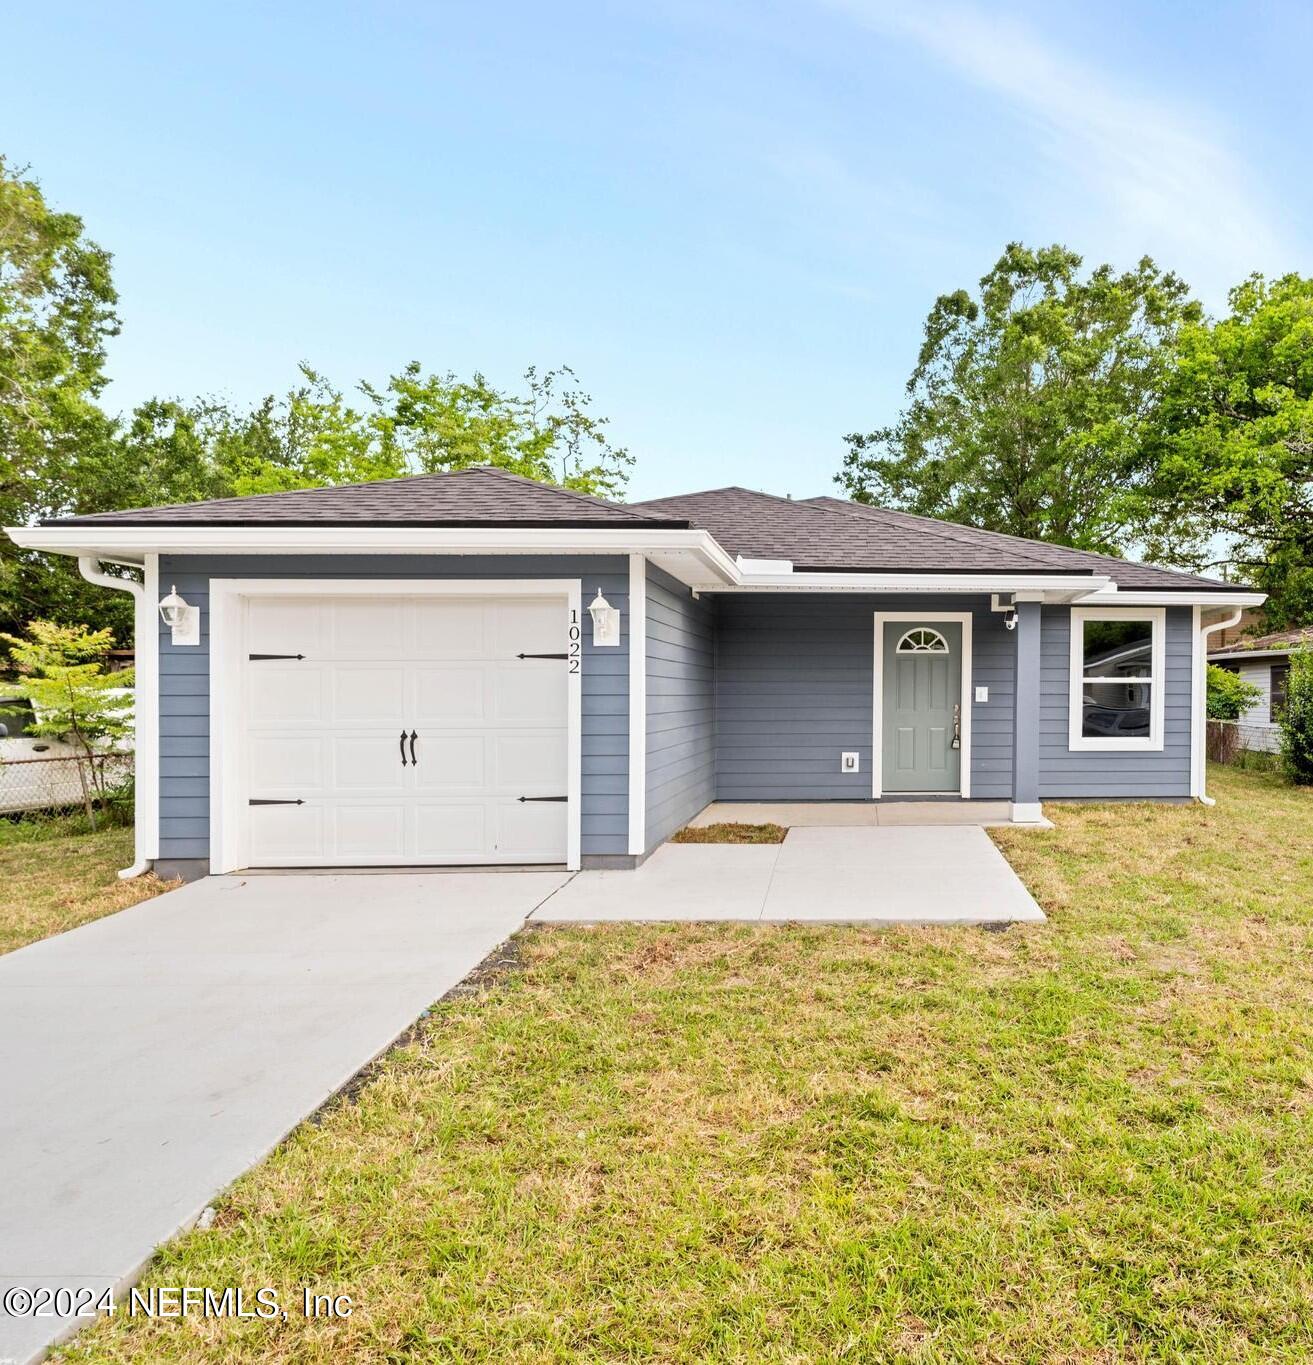 Jacksonville, FL home for sale located at 1022 W 24th Street, Jacksonville, FL 32209